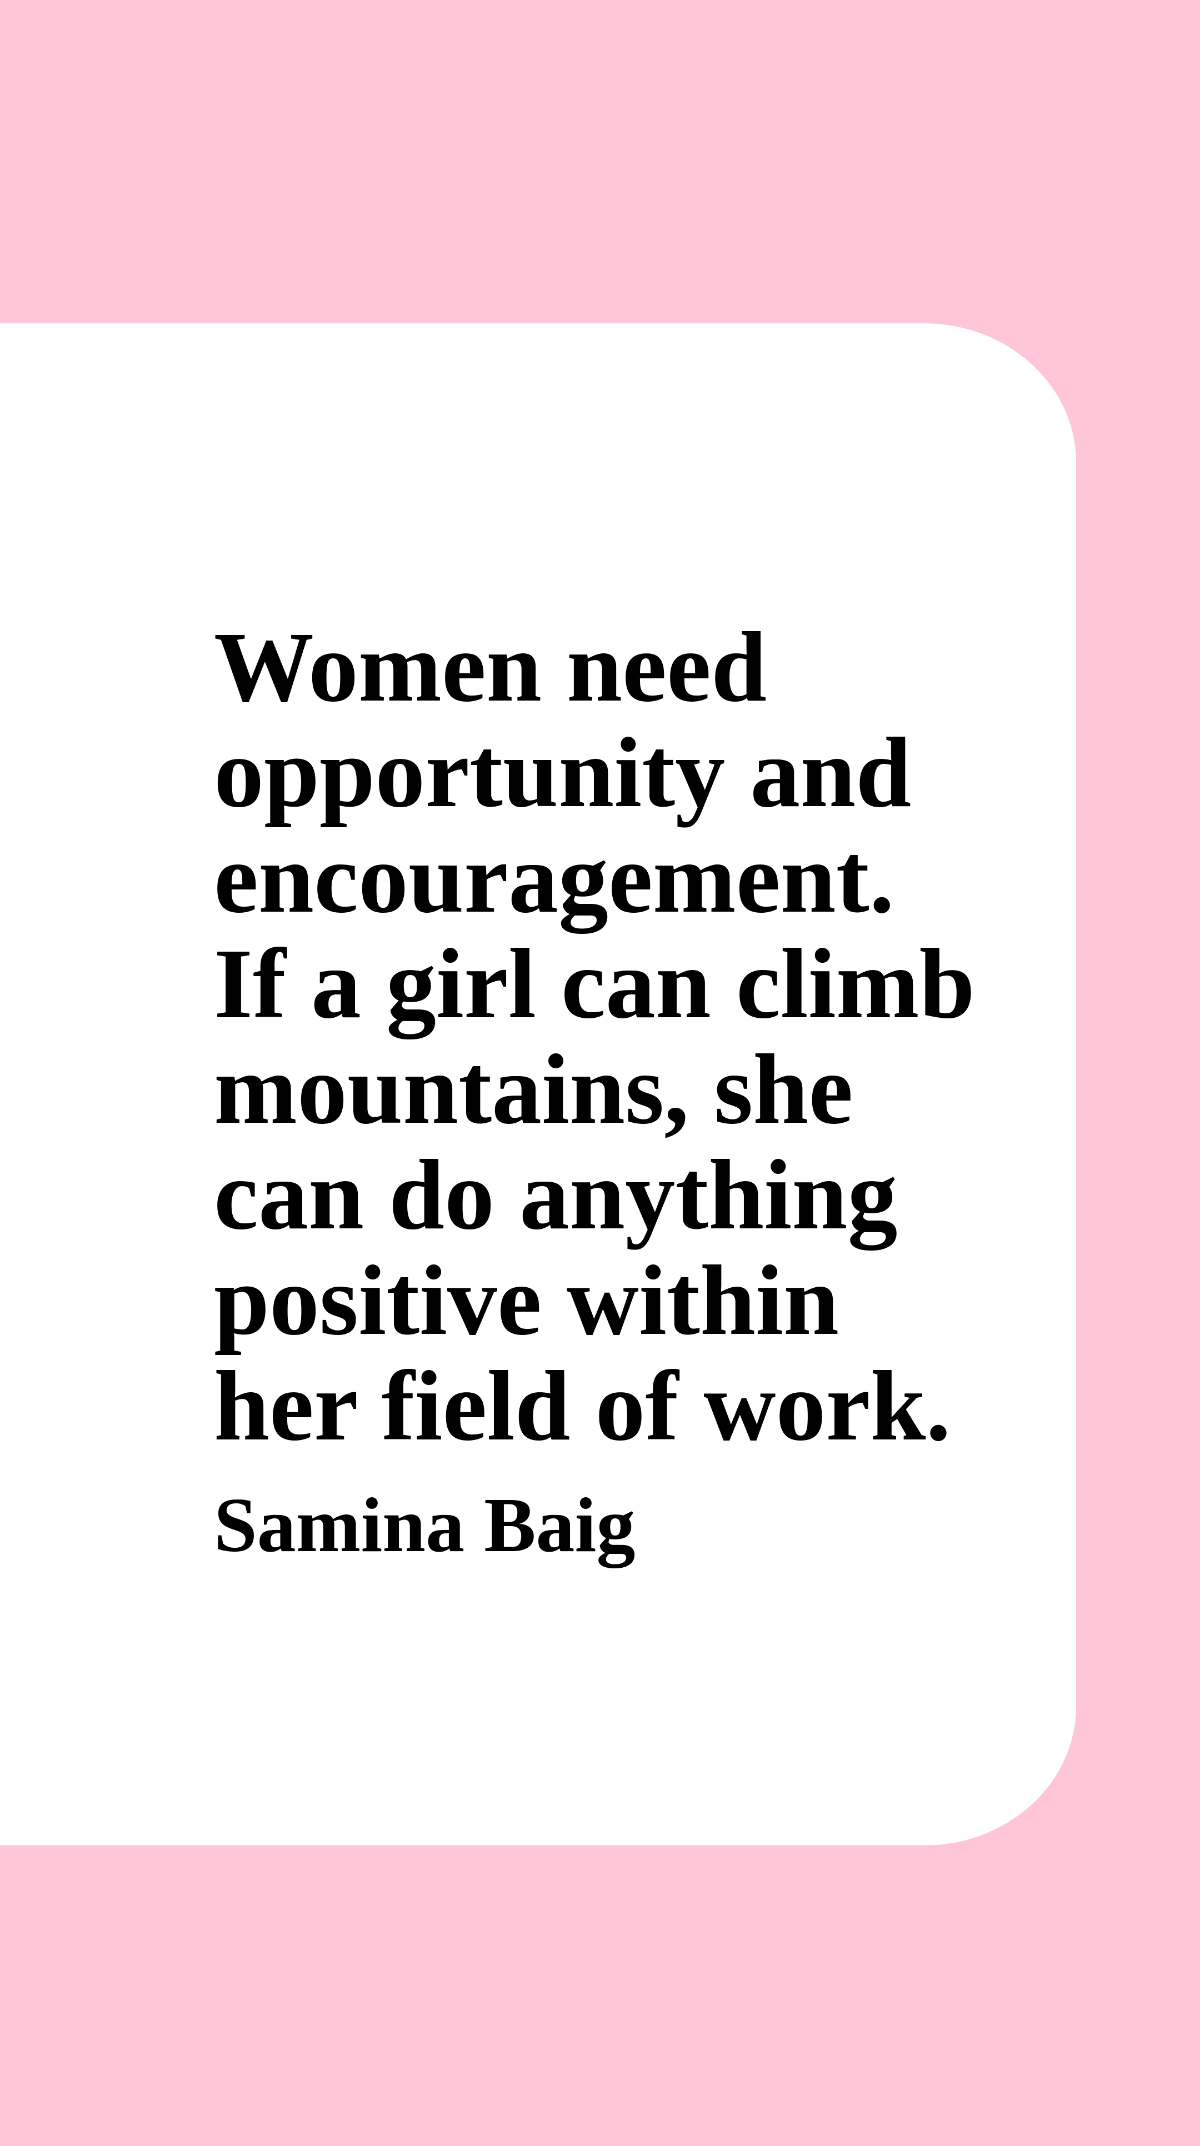 Free Samina Baig - Women need opportunity and encouragement. If a girl can climb mountains, she can do anything positive within her field of work. Template